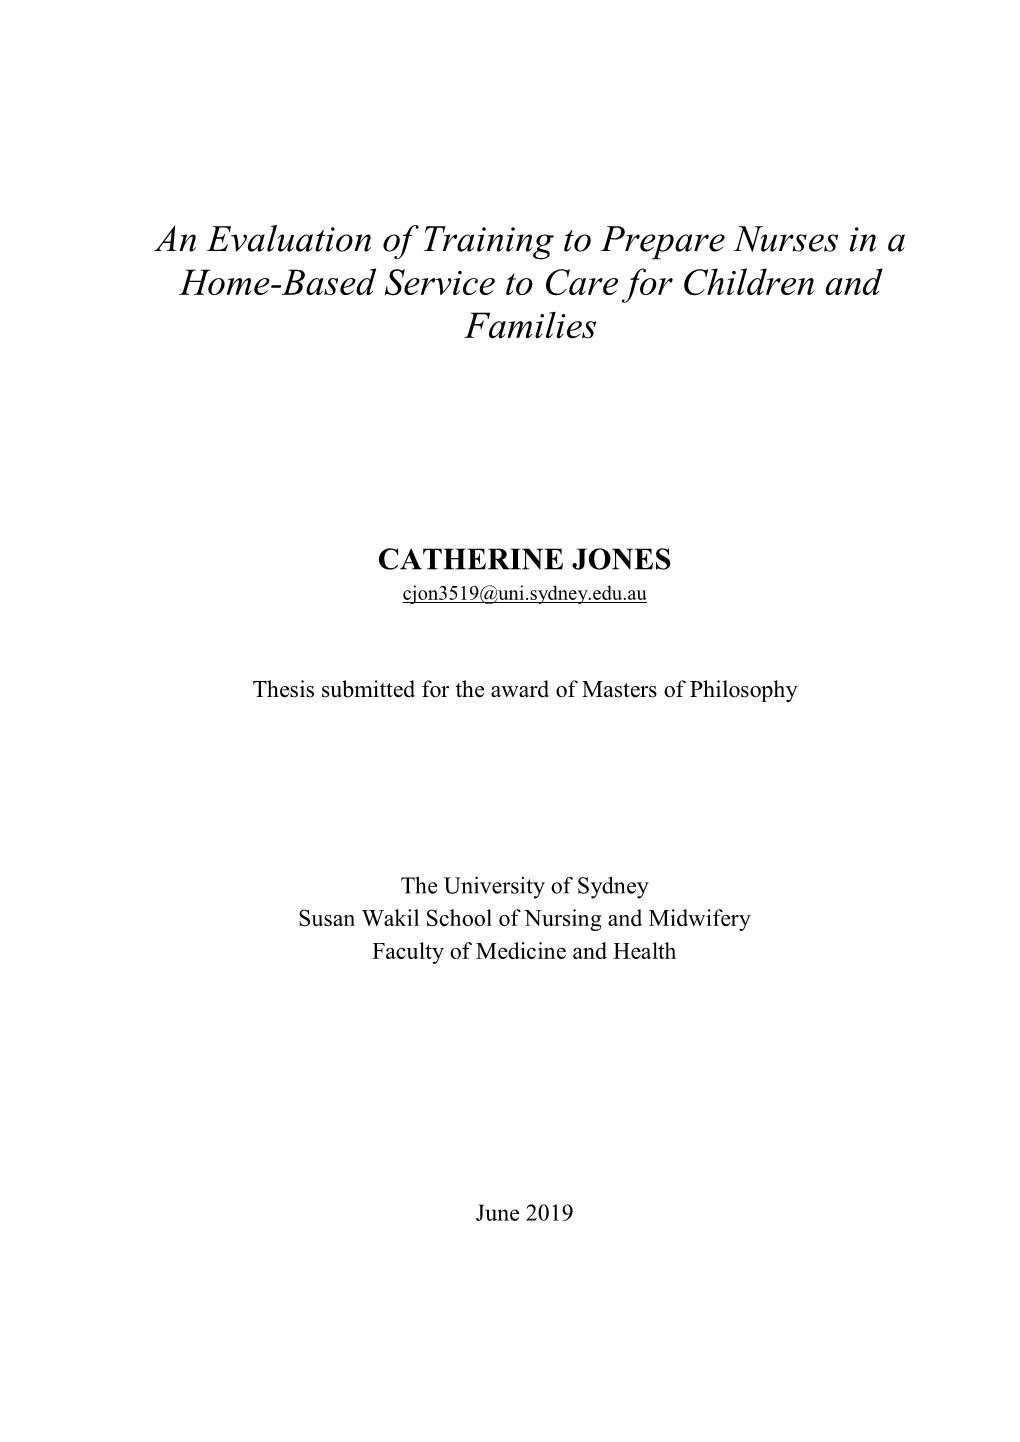 An Evaluation of Training to Prepare Nurses in a Home-Based Service to Care for Children and Families